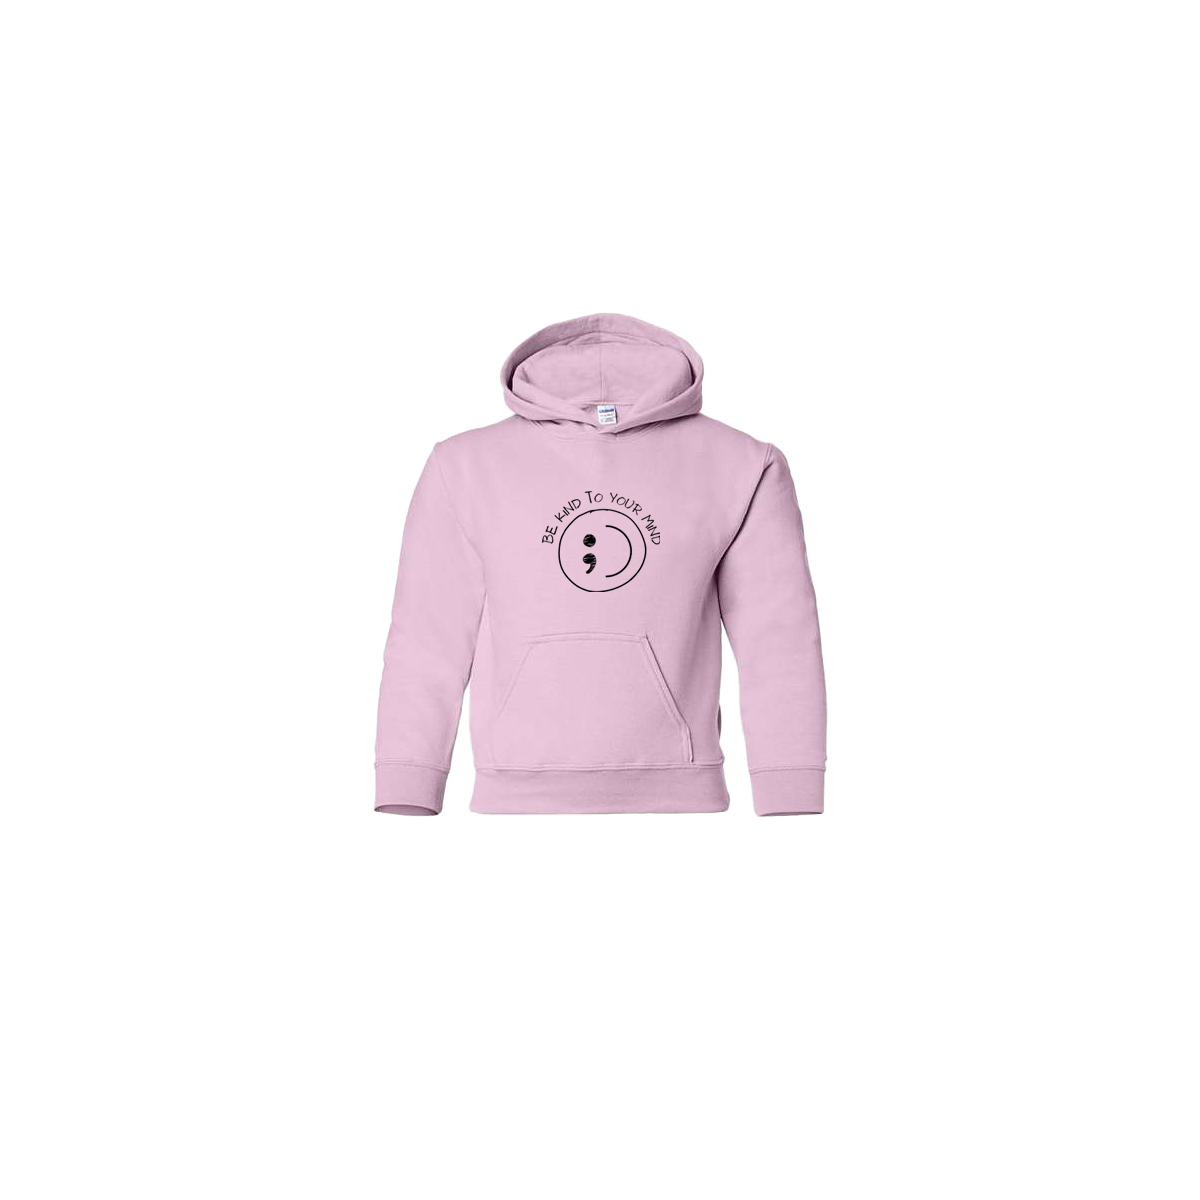 Be Kind To Your Mind Smiley Face Embroidered Light Pink Youth Hoodie